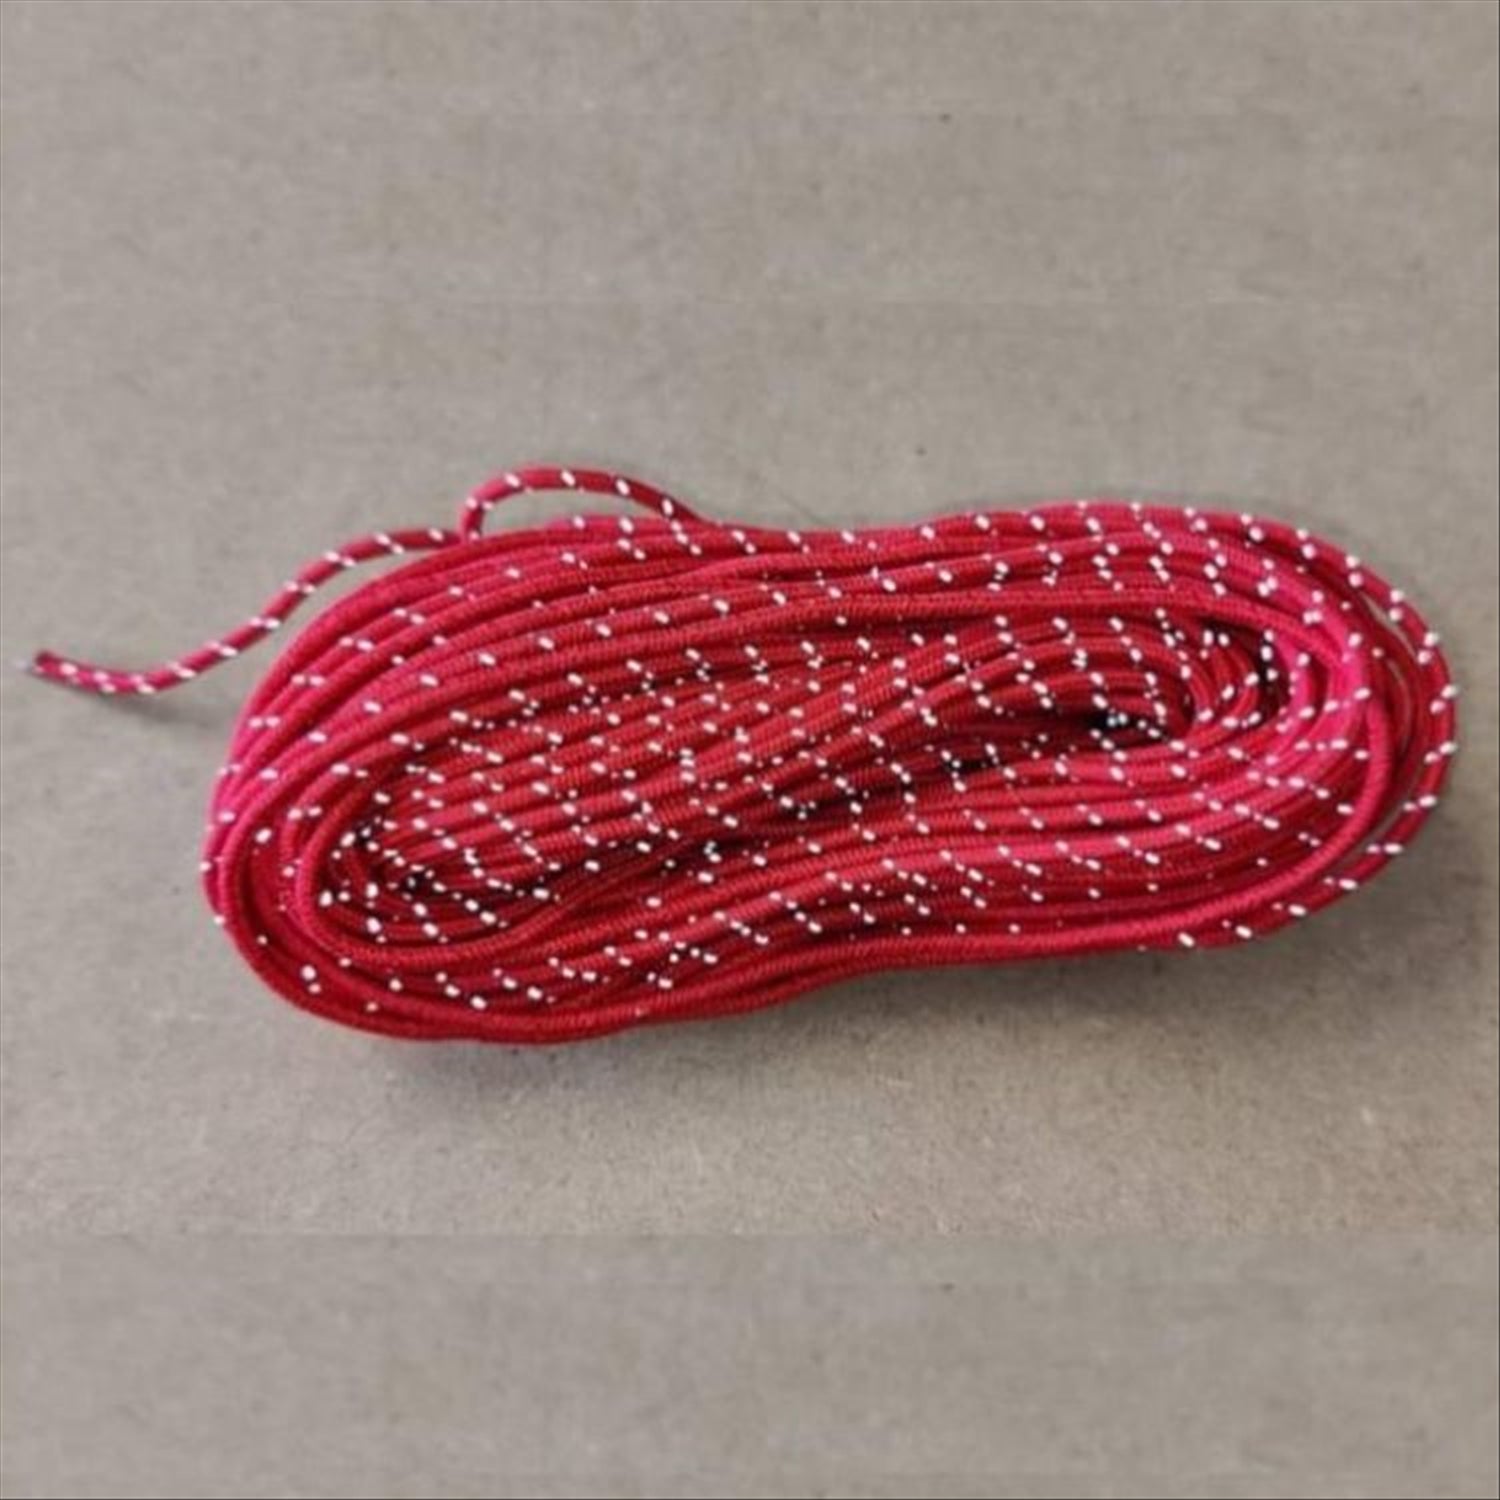 Intents Ultralight tent guy rope - 20m x 2mm